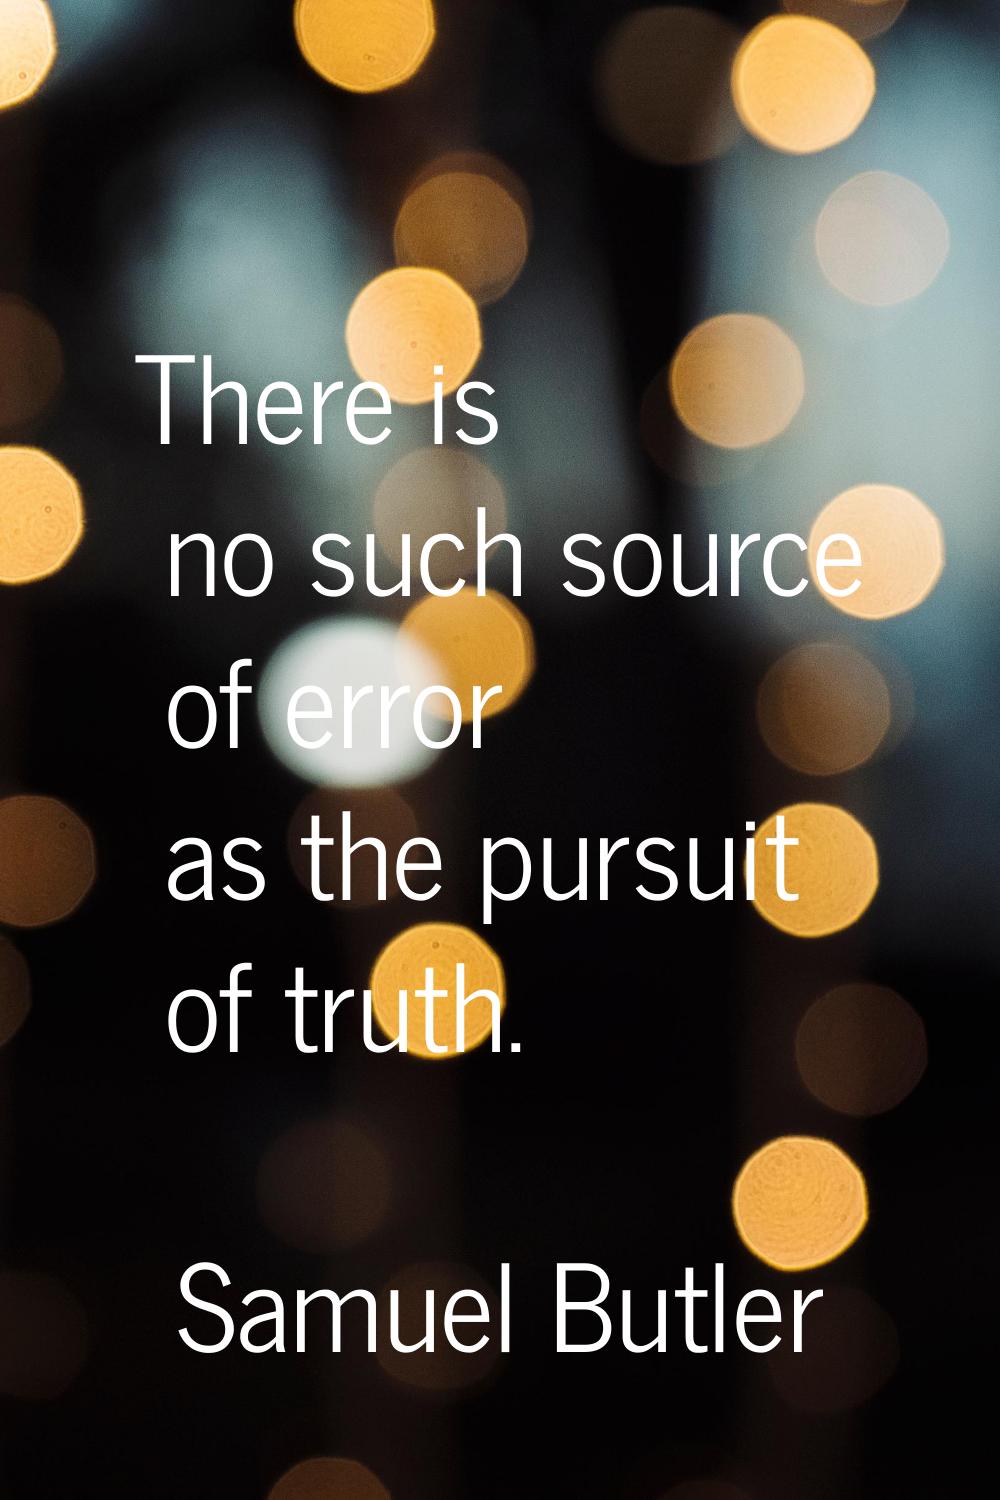 There is no such source of error as the pursuit of truth.